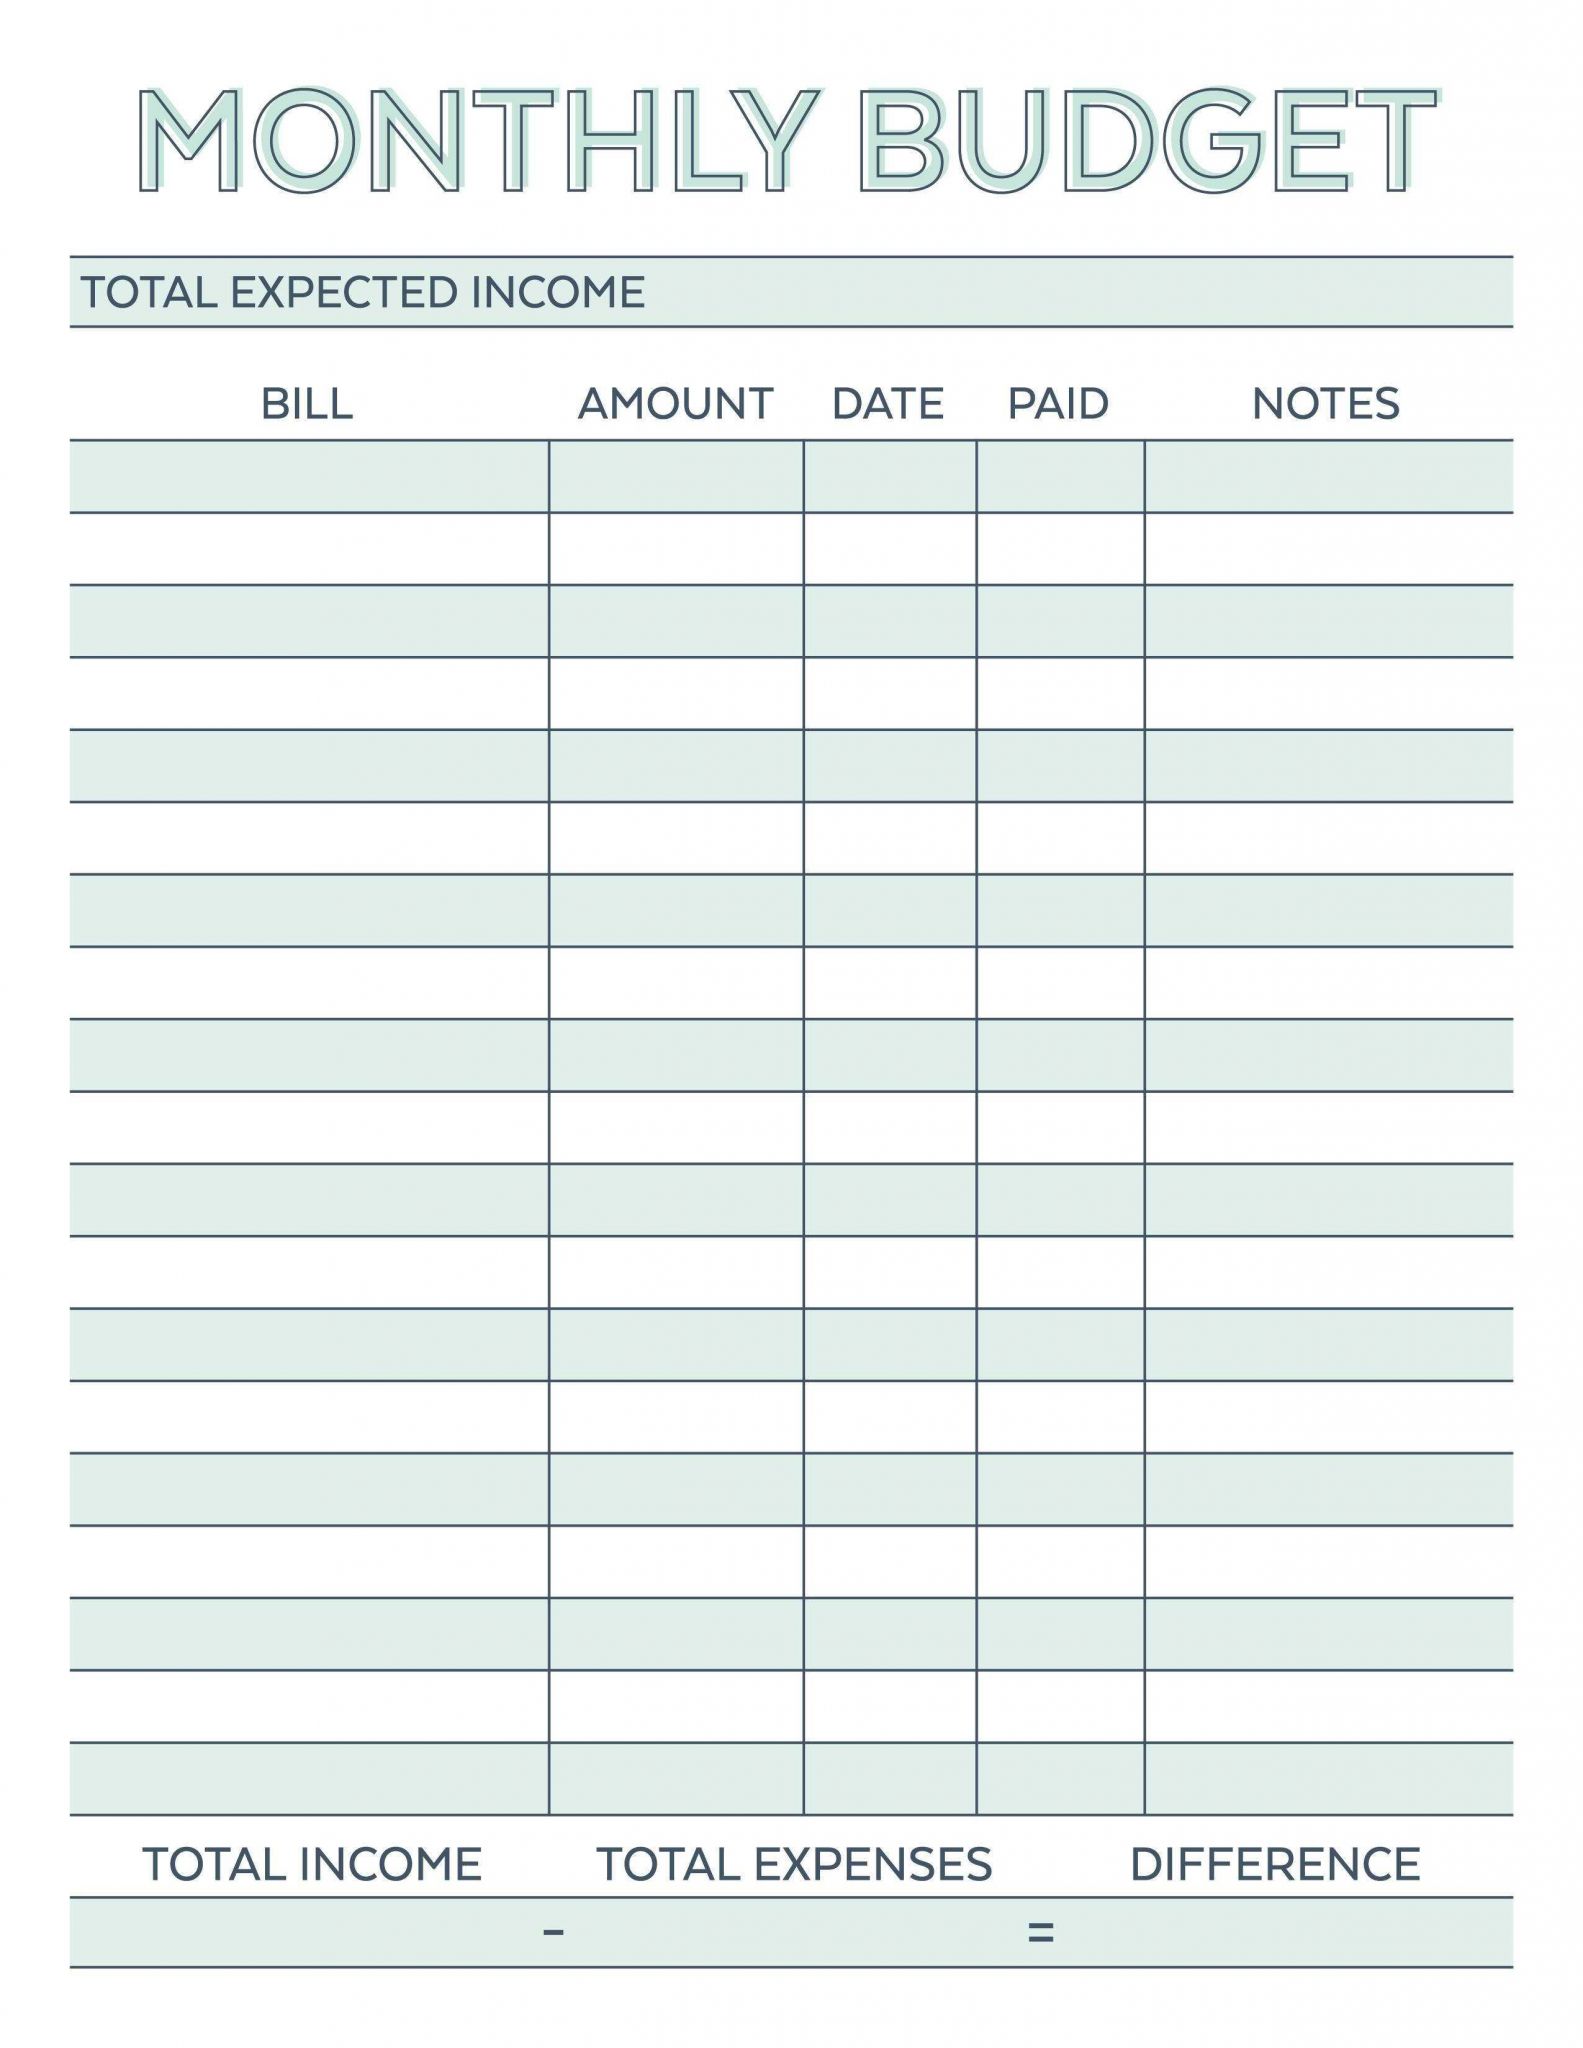 Monthly Budget Worksheet Pdf or Monthly Bud Spreadsheet Uk Download Template 15 Yearly Calendar